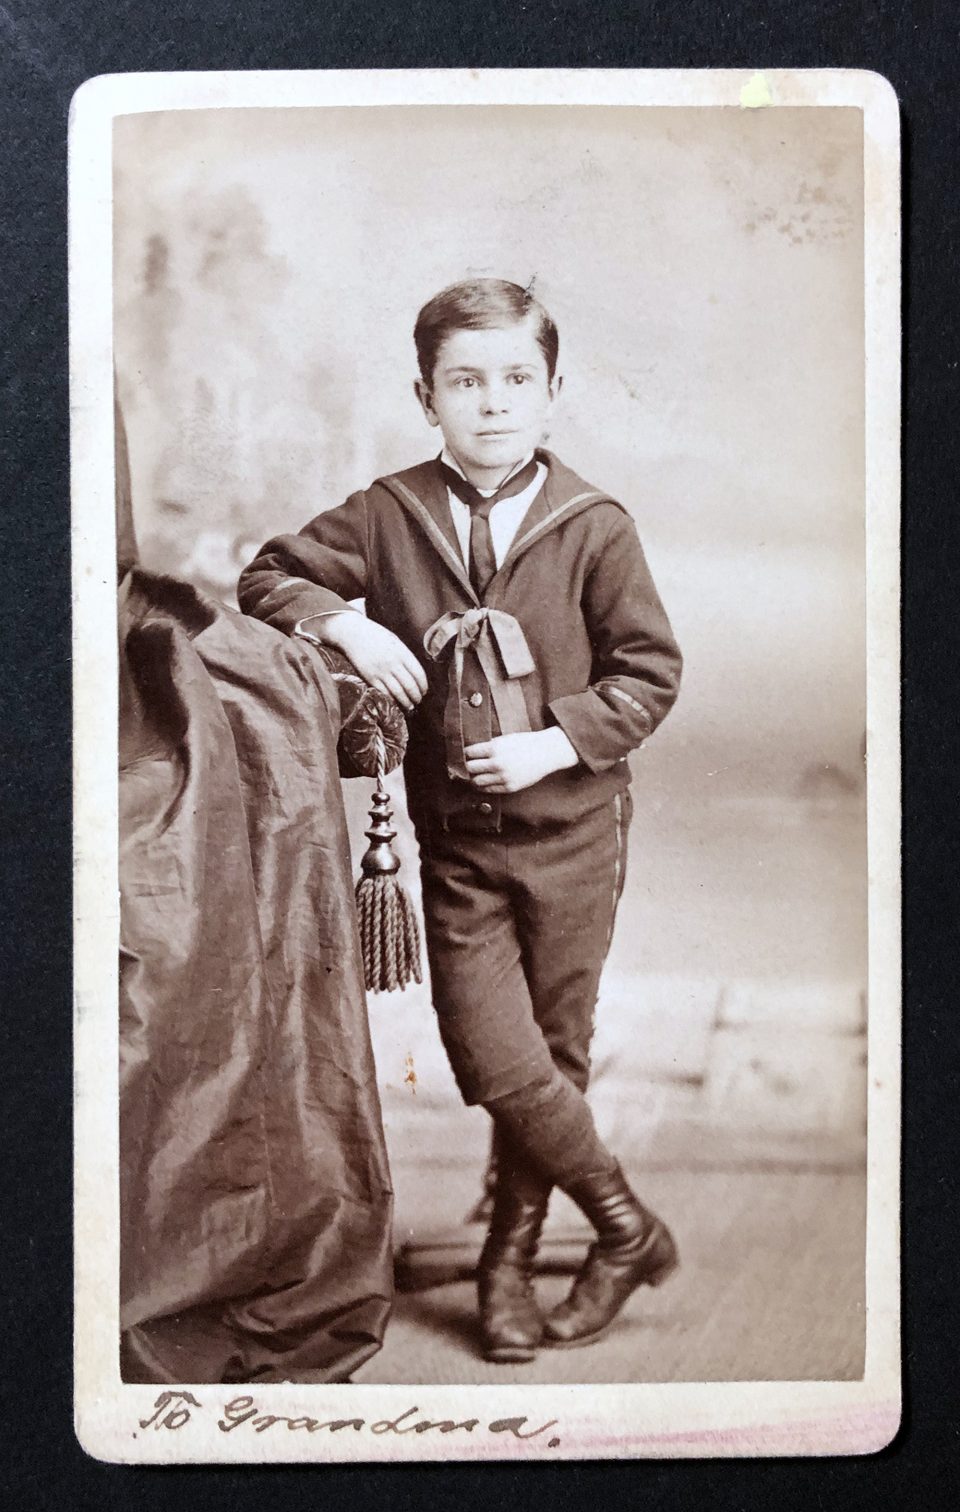 Carte de visite size portrait by John H. Oleson of a young boy in a suit and boots, presumably the older brother of the baby shown above. This photo has a matching inscription on the bottom edge in pen and ink, "To Grandma." 